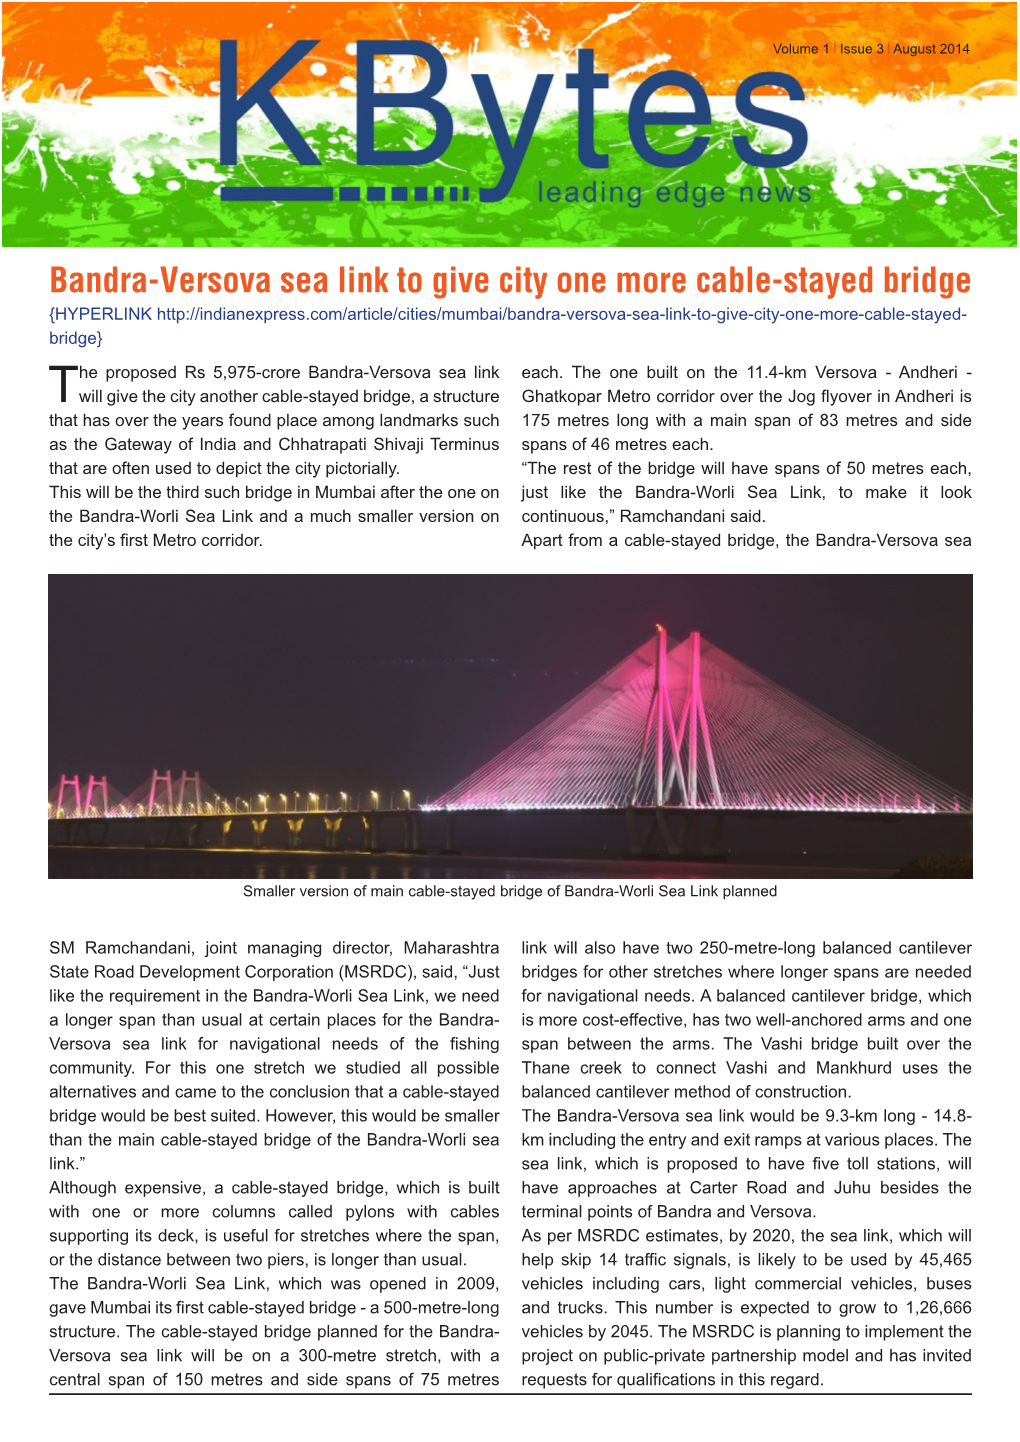 Bandra-Versova Sea Link to Give City One More Cable-Stayed Bridge